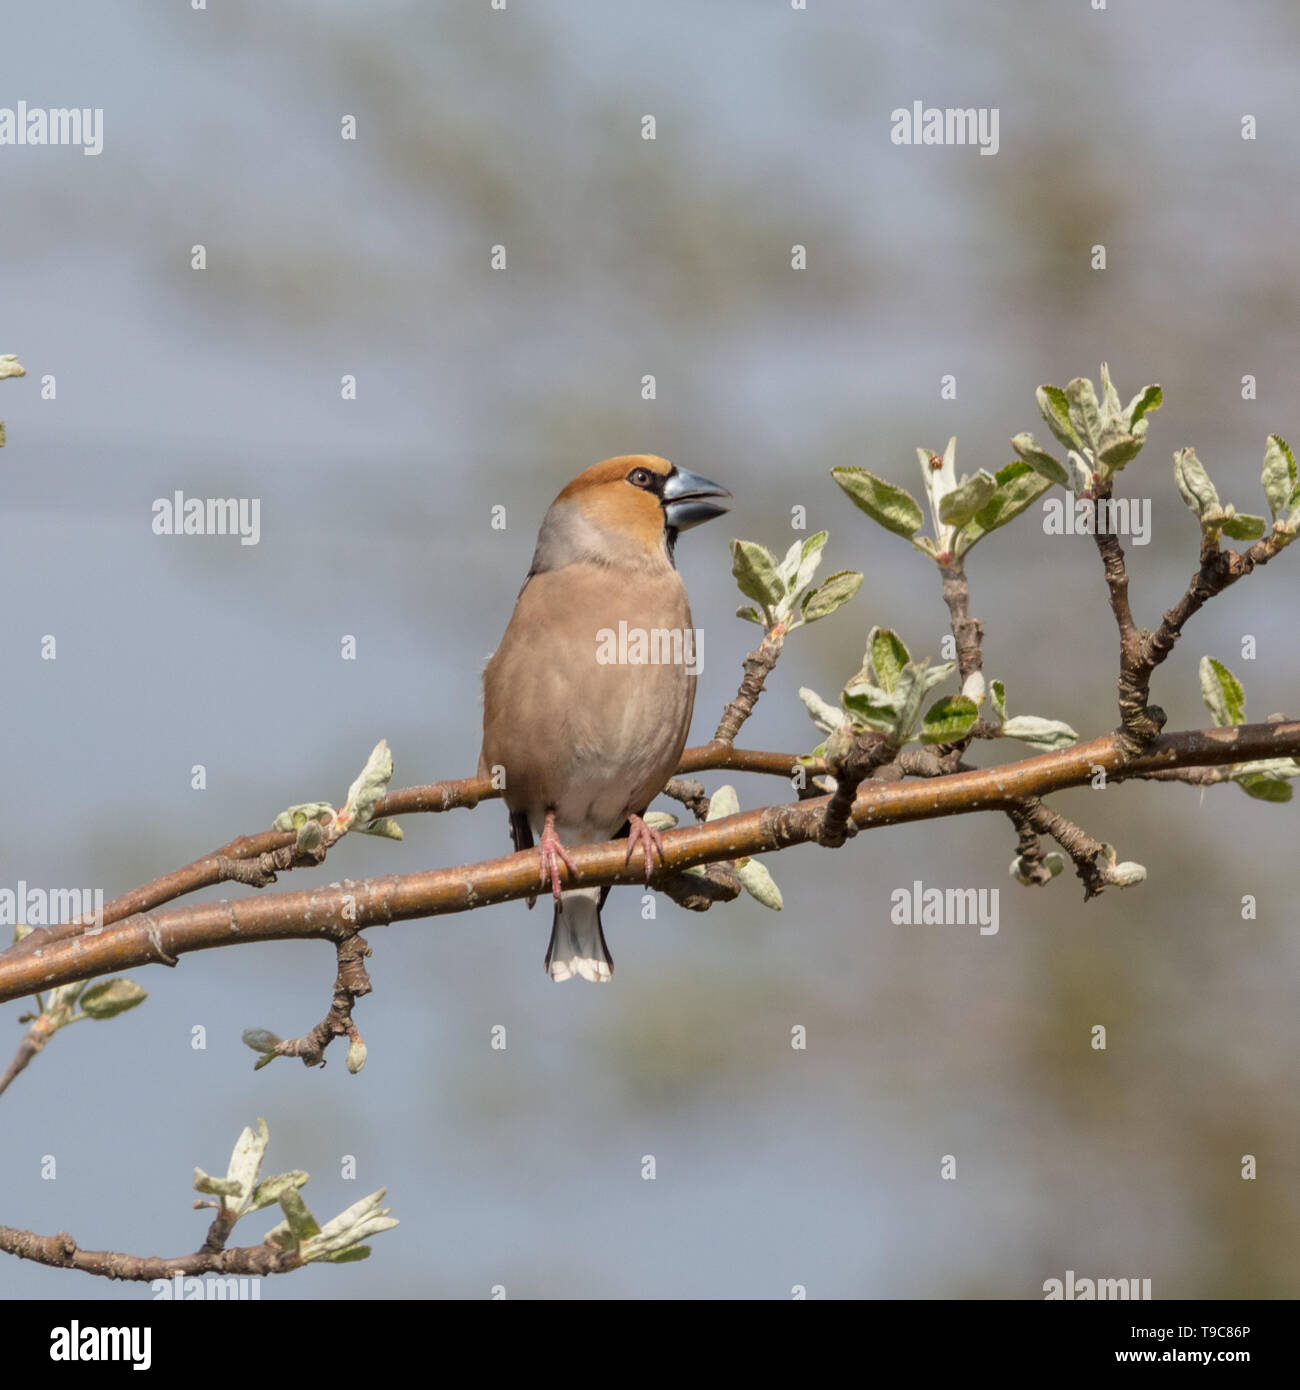 Hawfinch, Stenknäck (Coccothraustes coccothraustes) Stock Photo